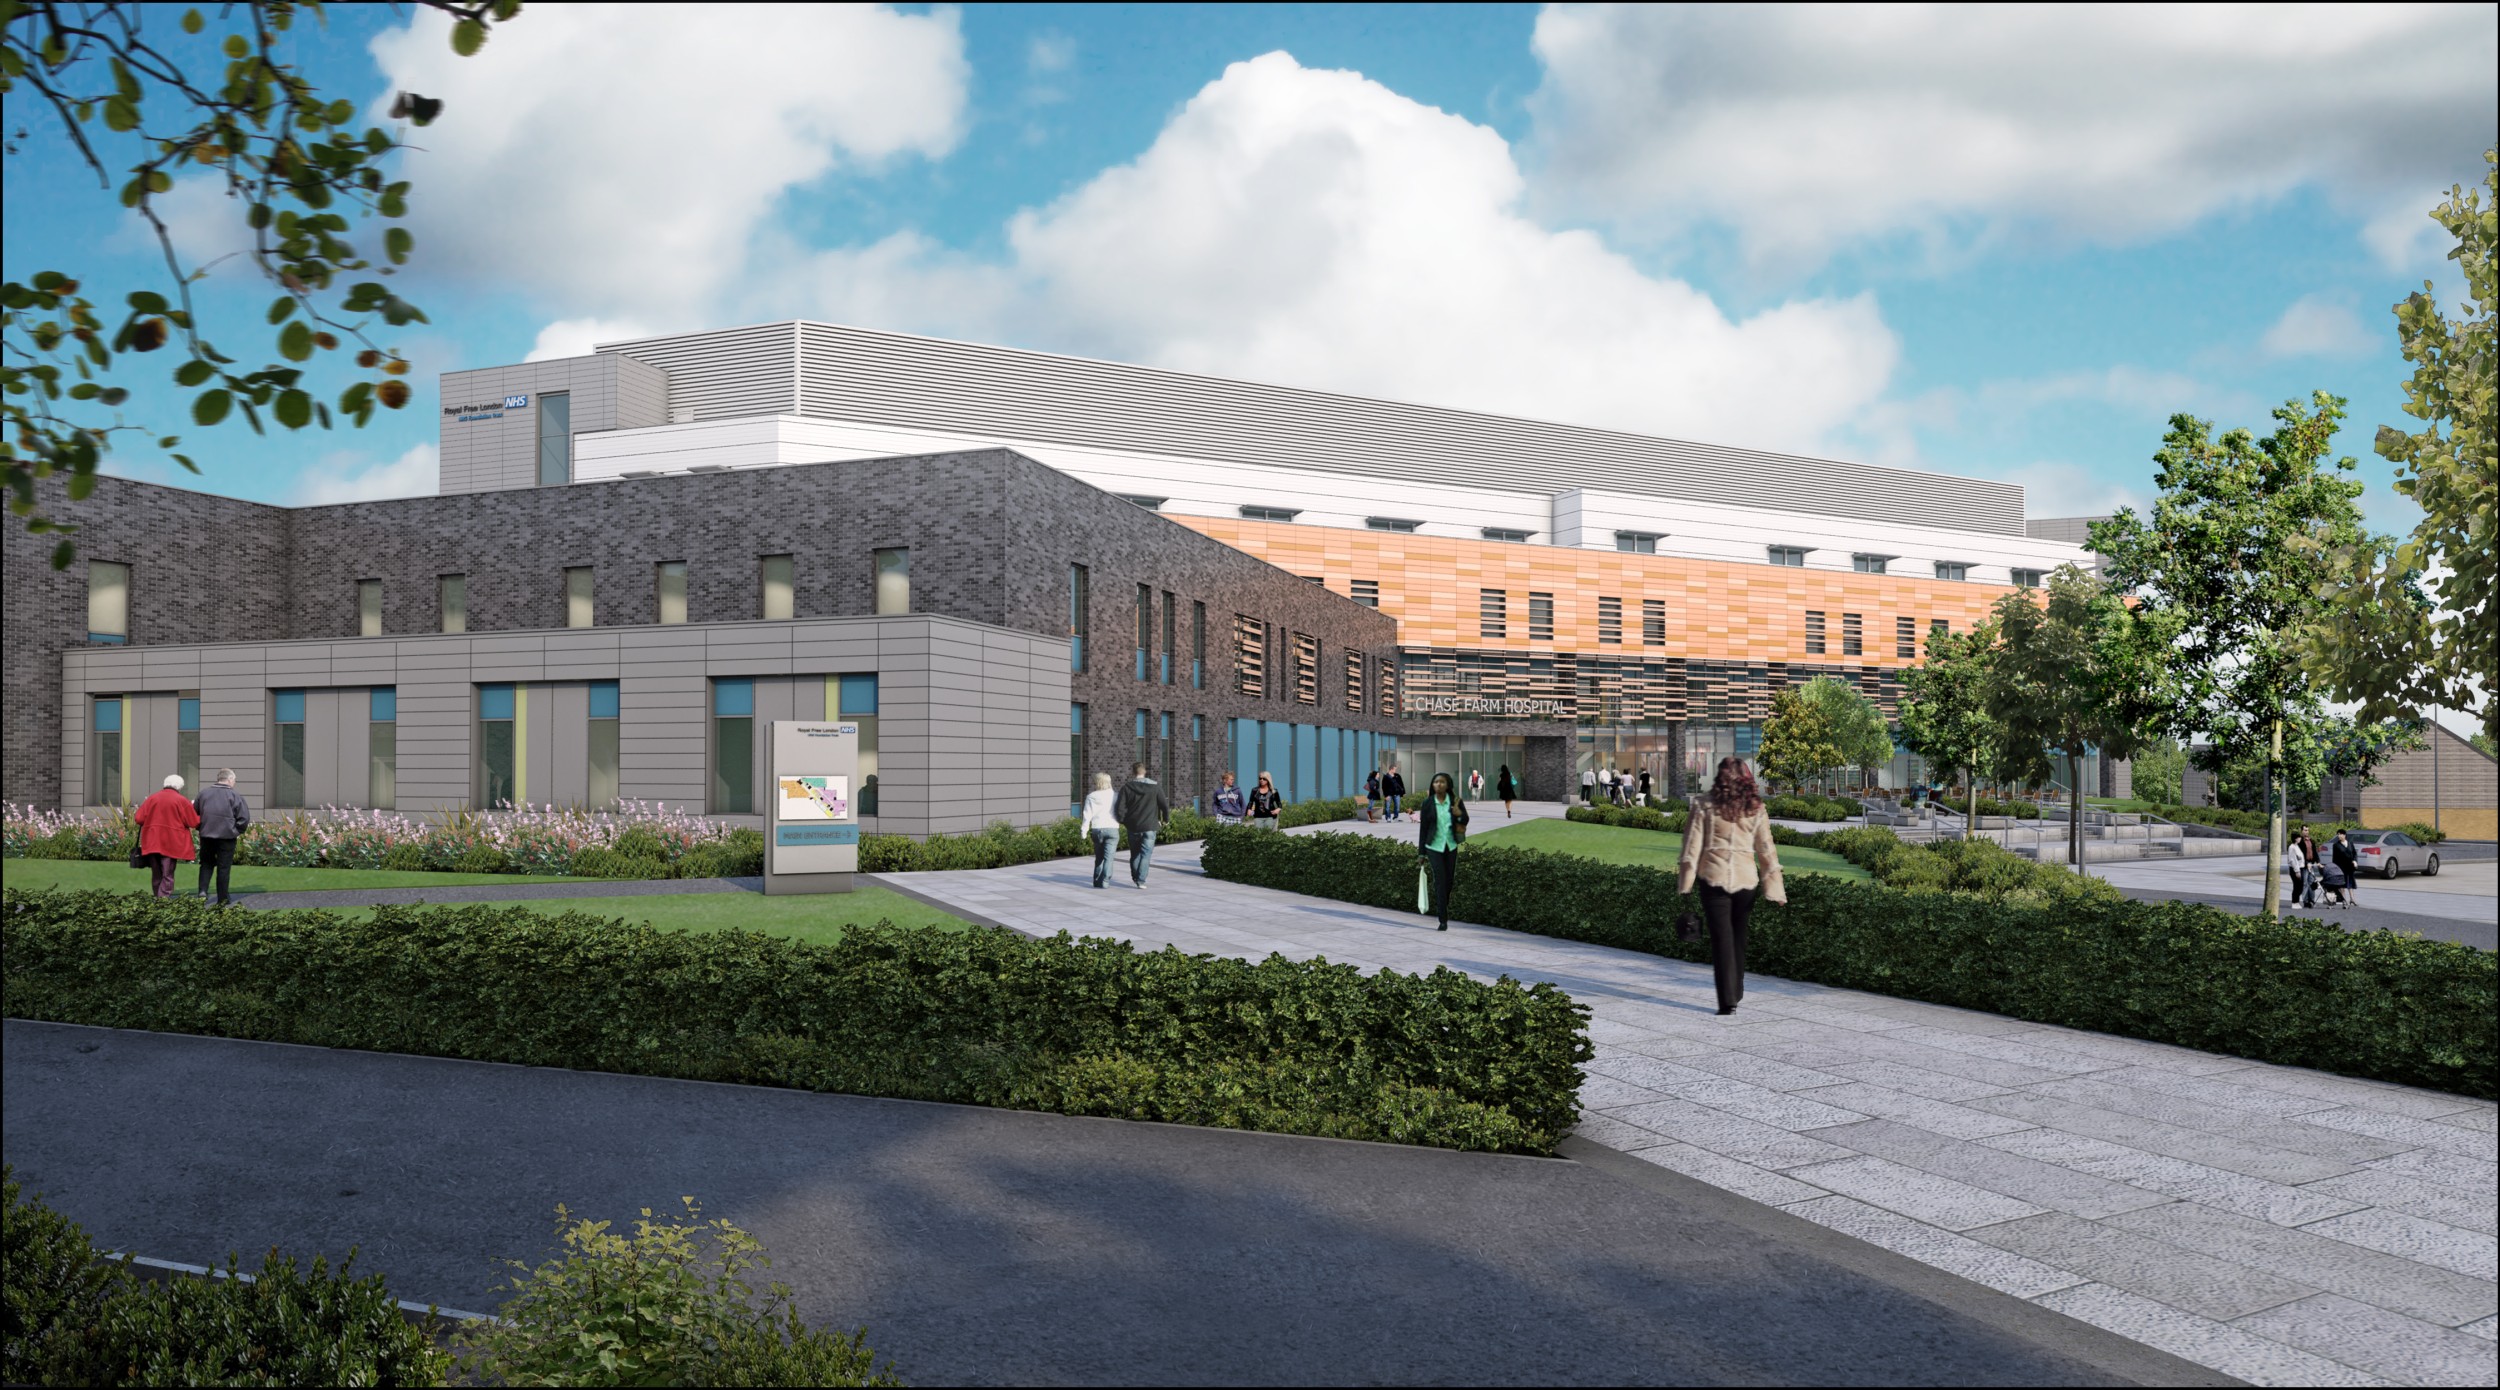 Artist's impression of the new Chase Farm Hospital